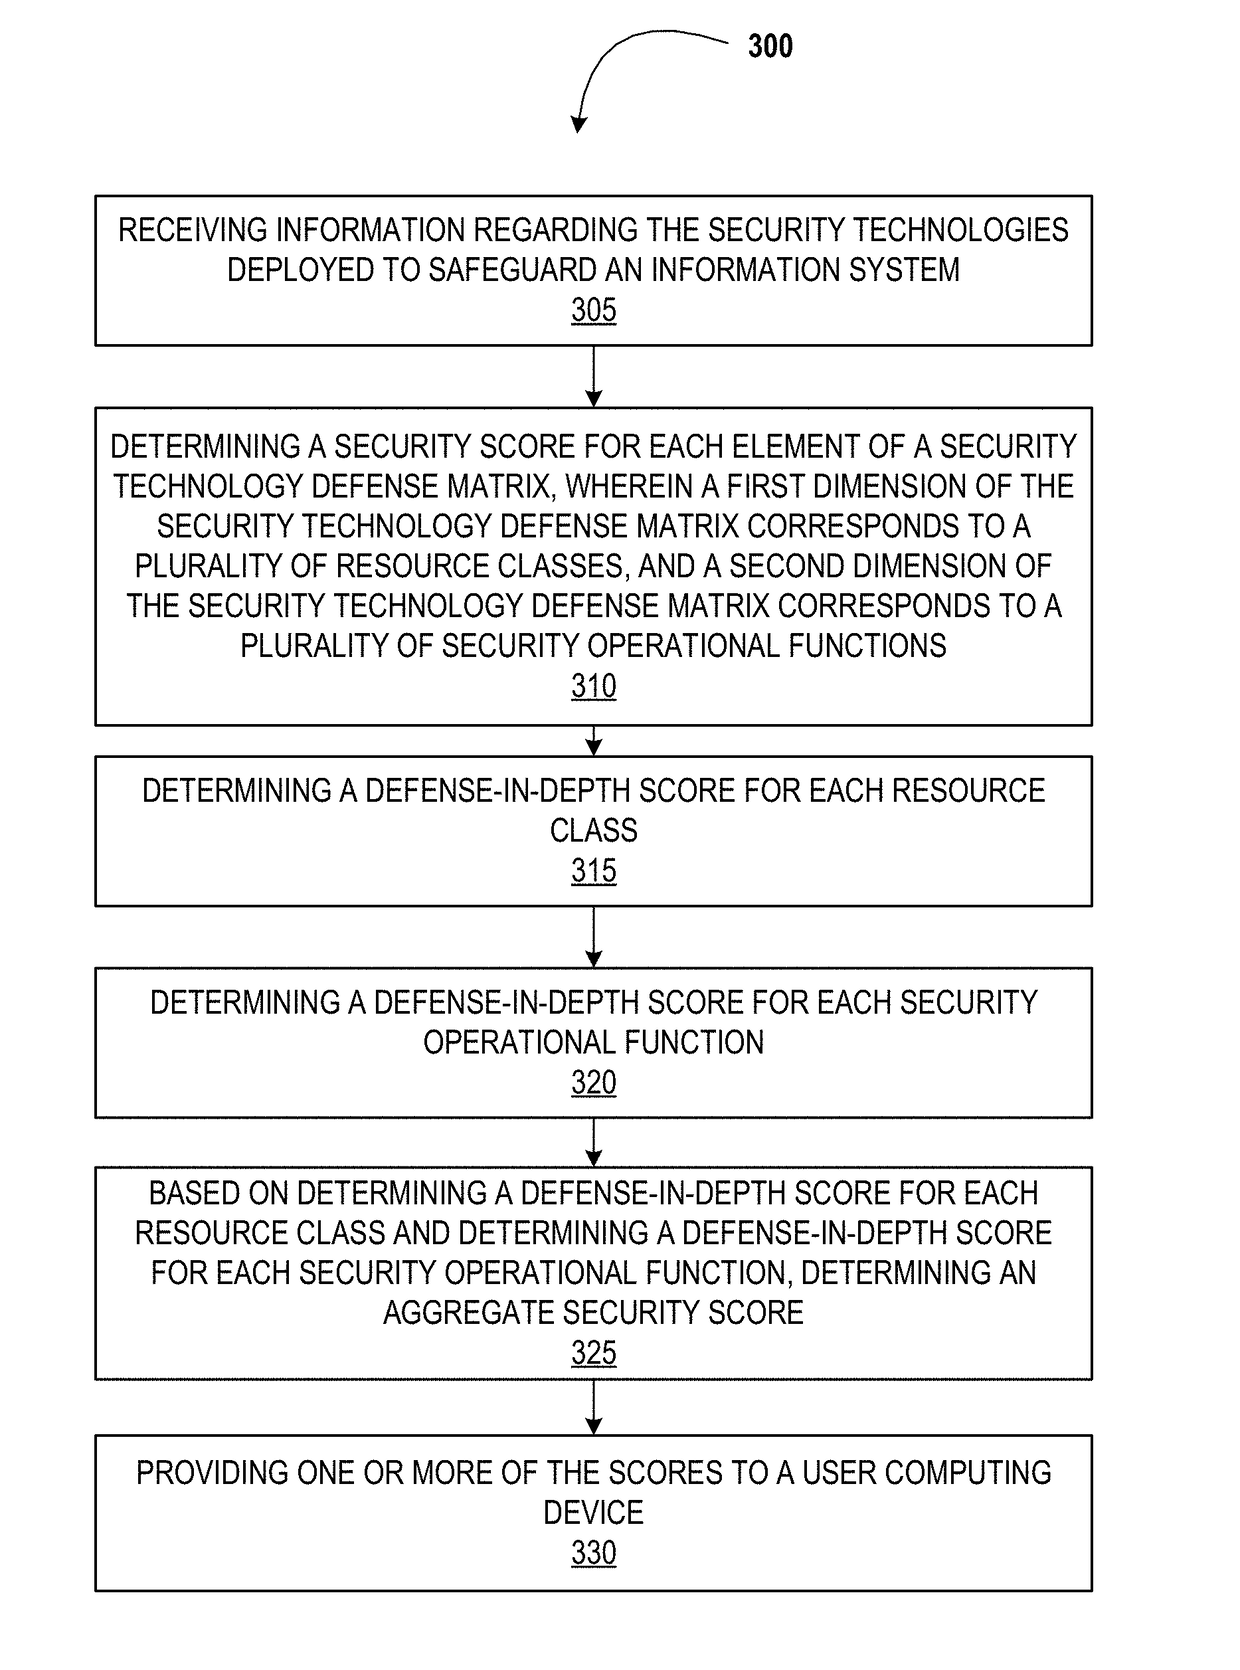 System for determining effectiveness and allocation of information security technologies